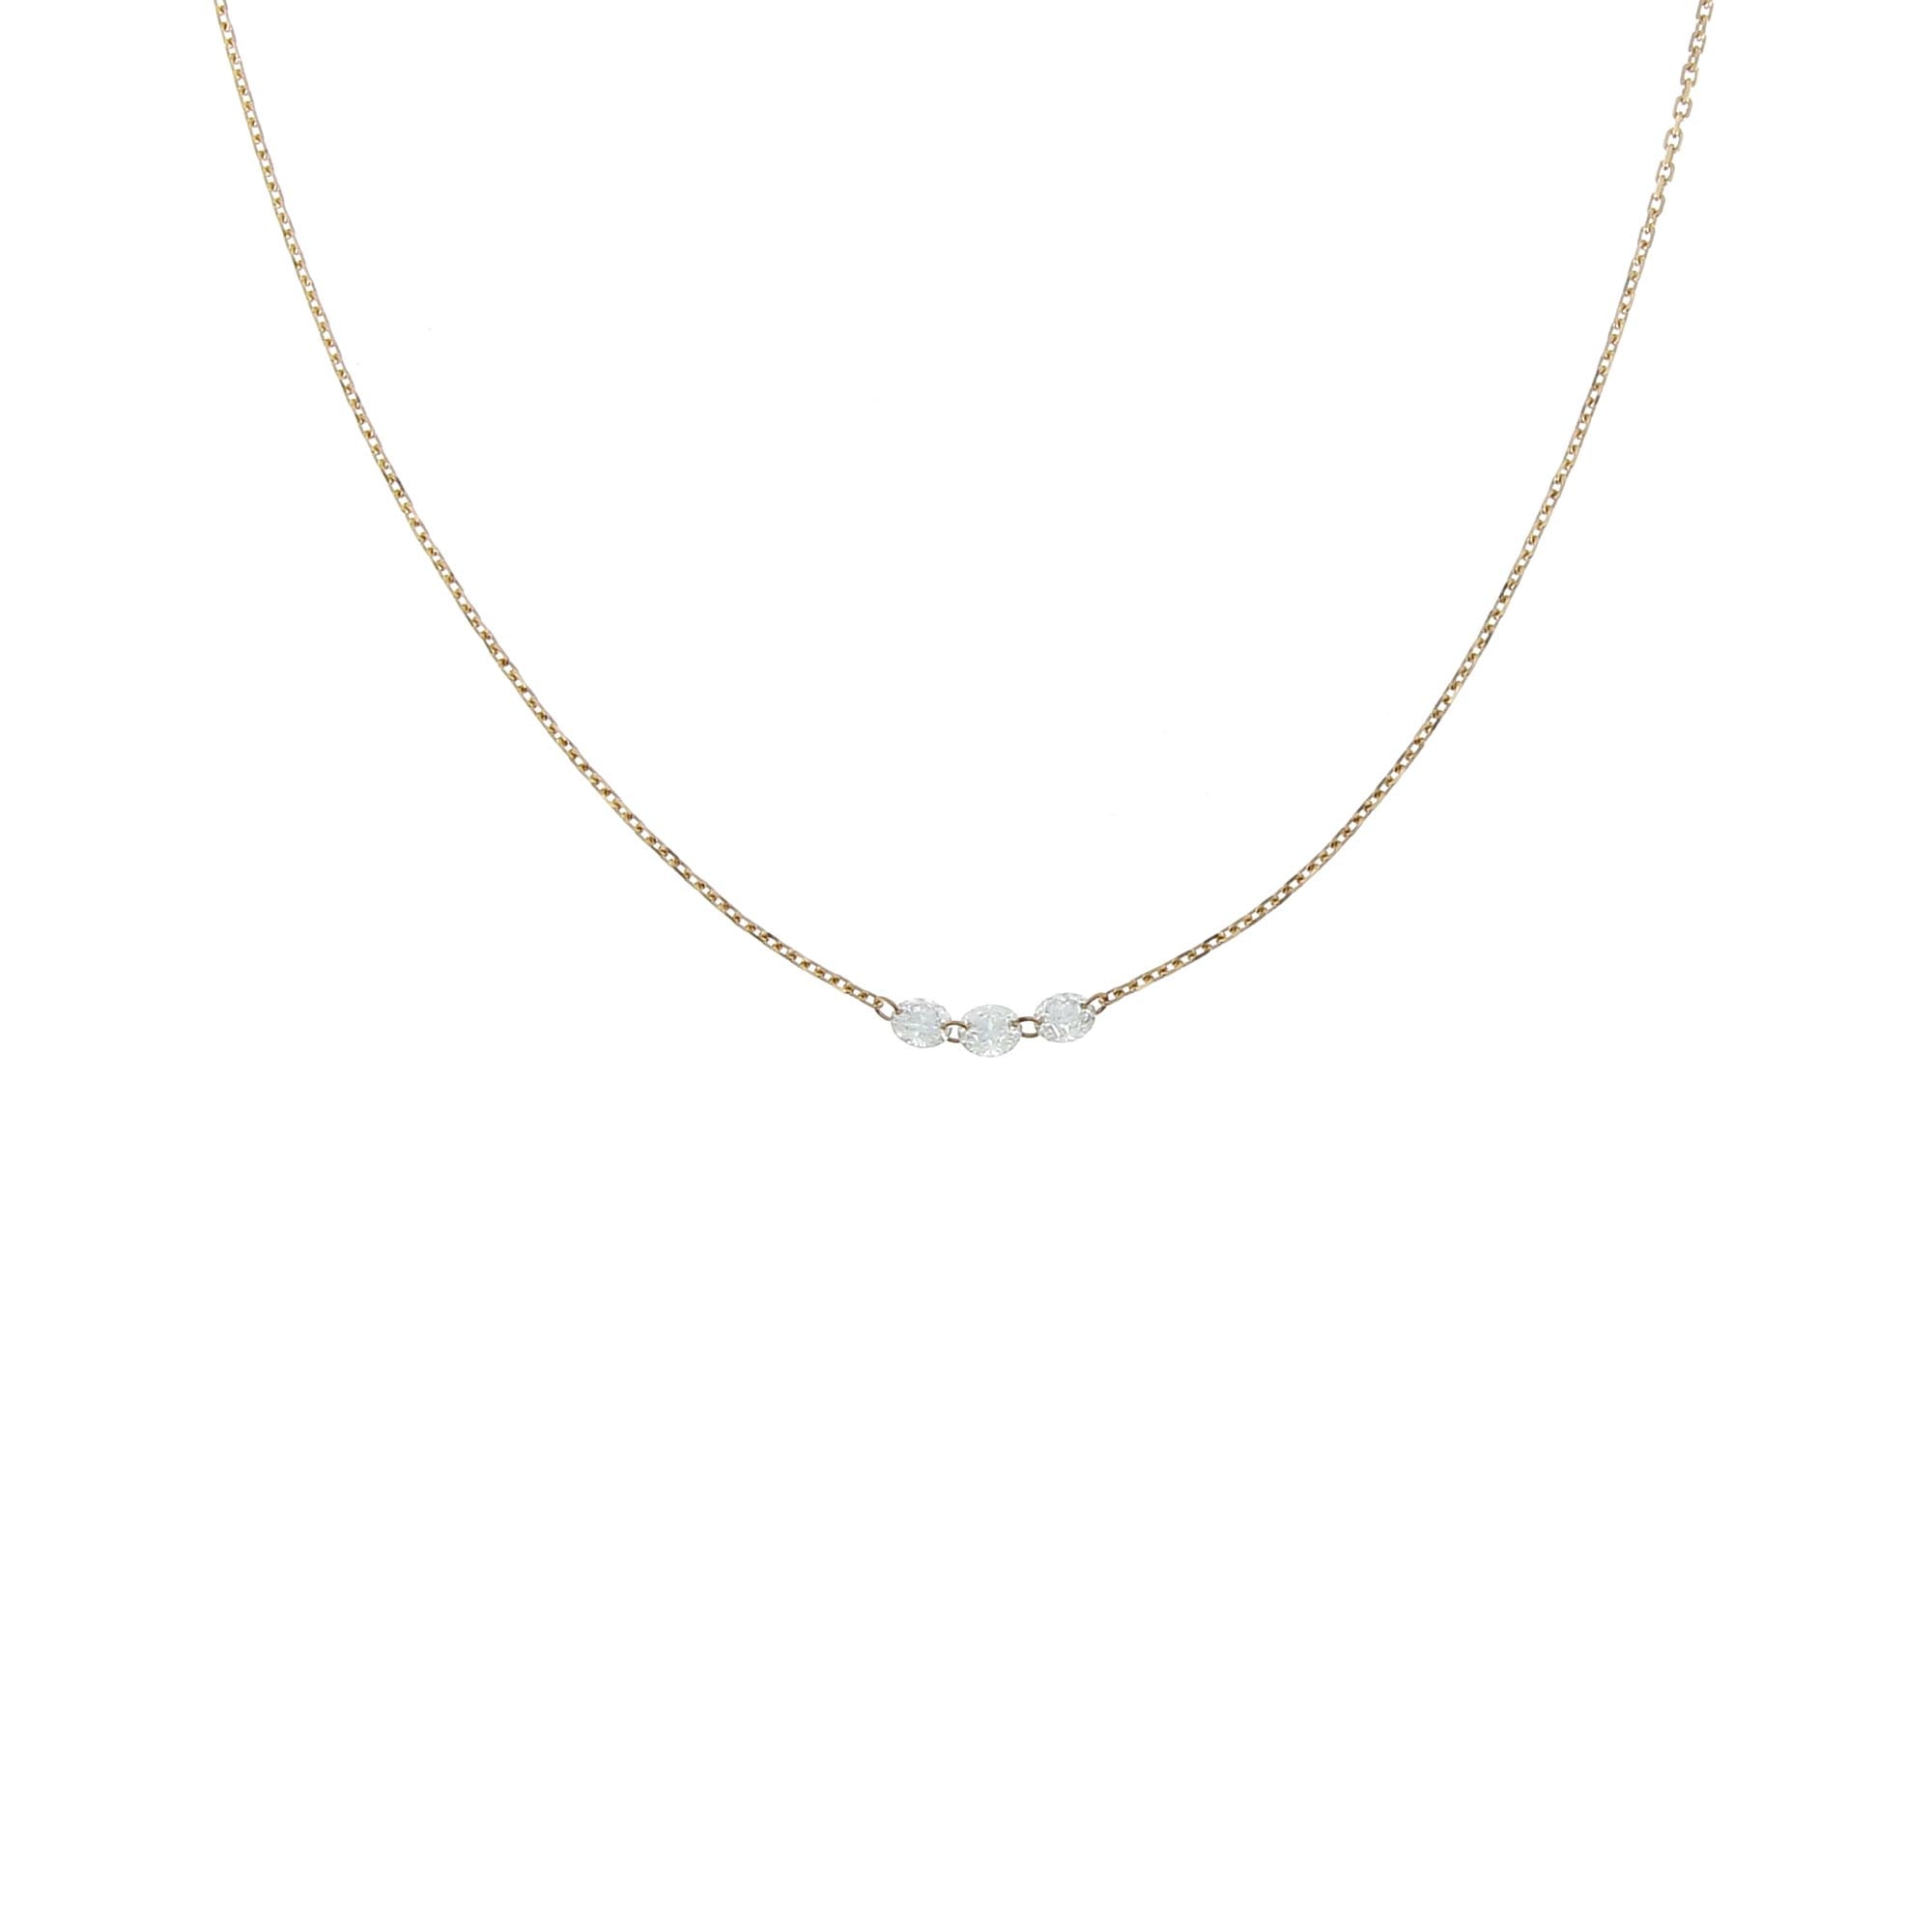 3.5mm Rose Gold Diamond Encrusted Necklace 